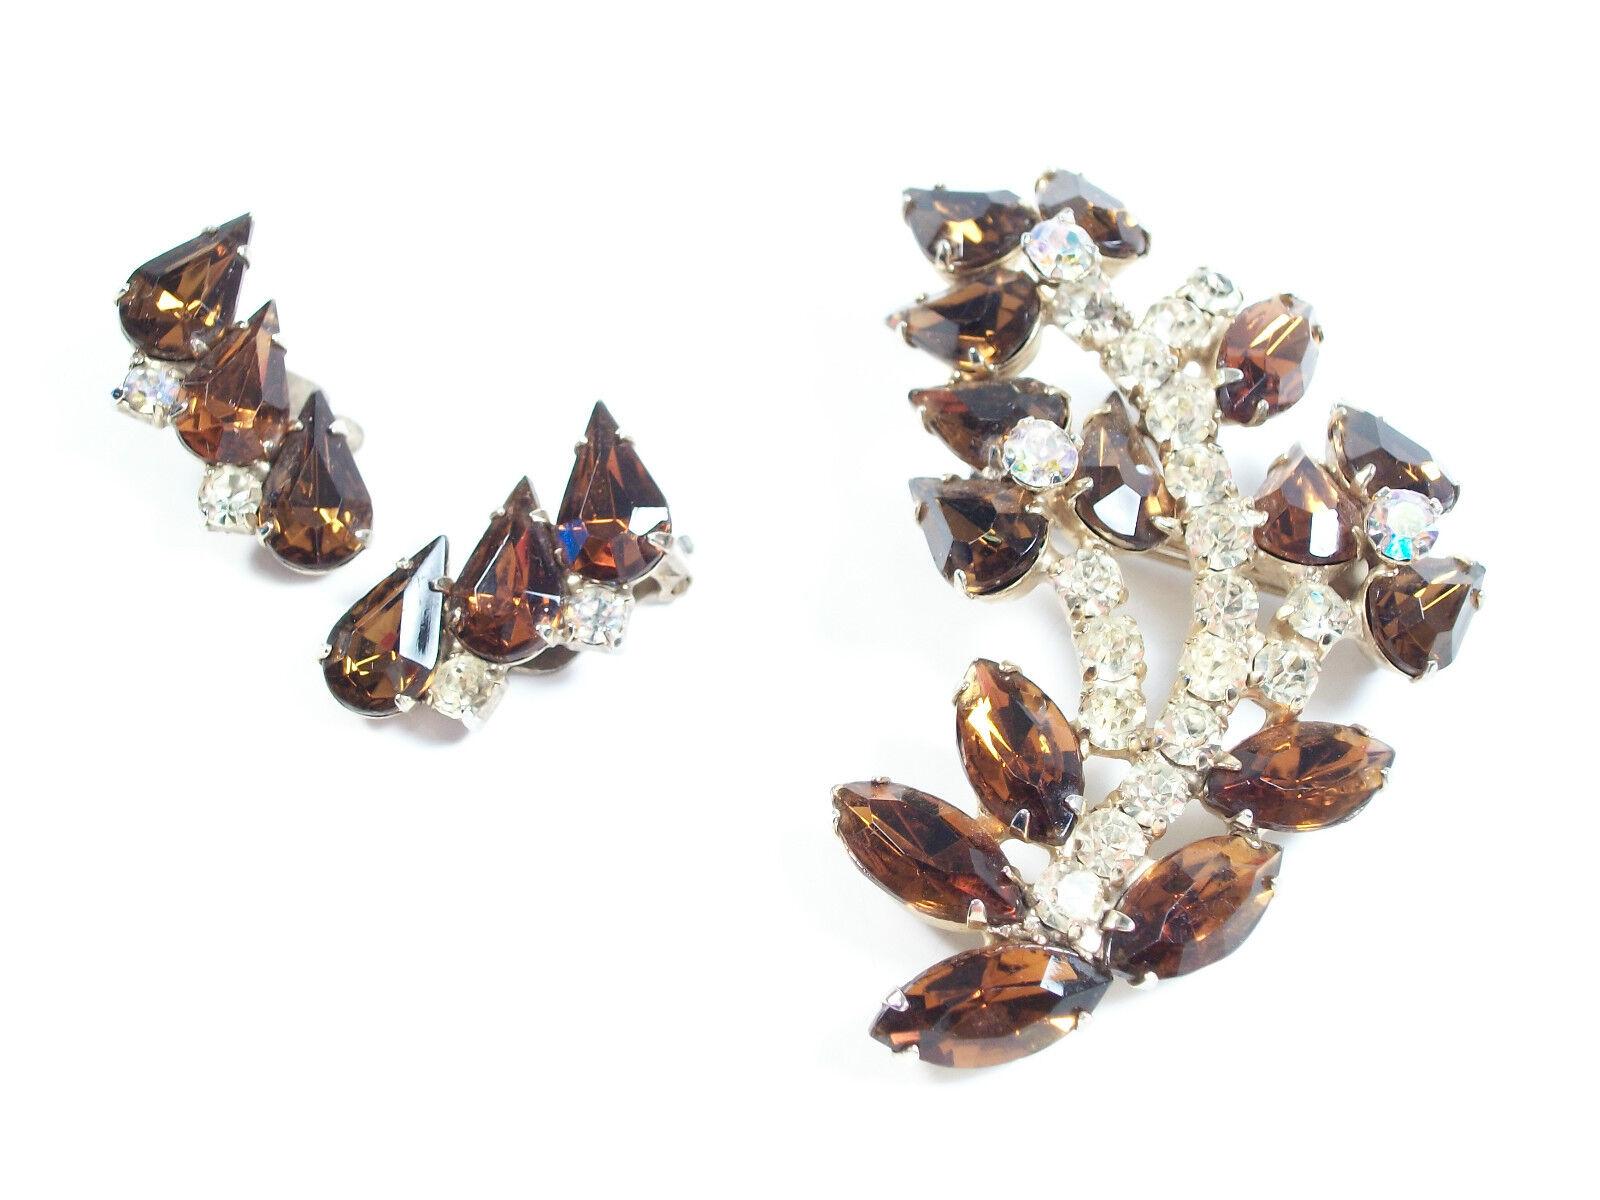 Vintage Brooch & Earrings Demi Parure - Faux Topaz & Rhinestones - Circa 1950's In Good Condition For Sale In Chatham, CA